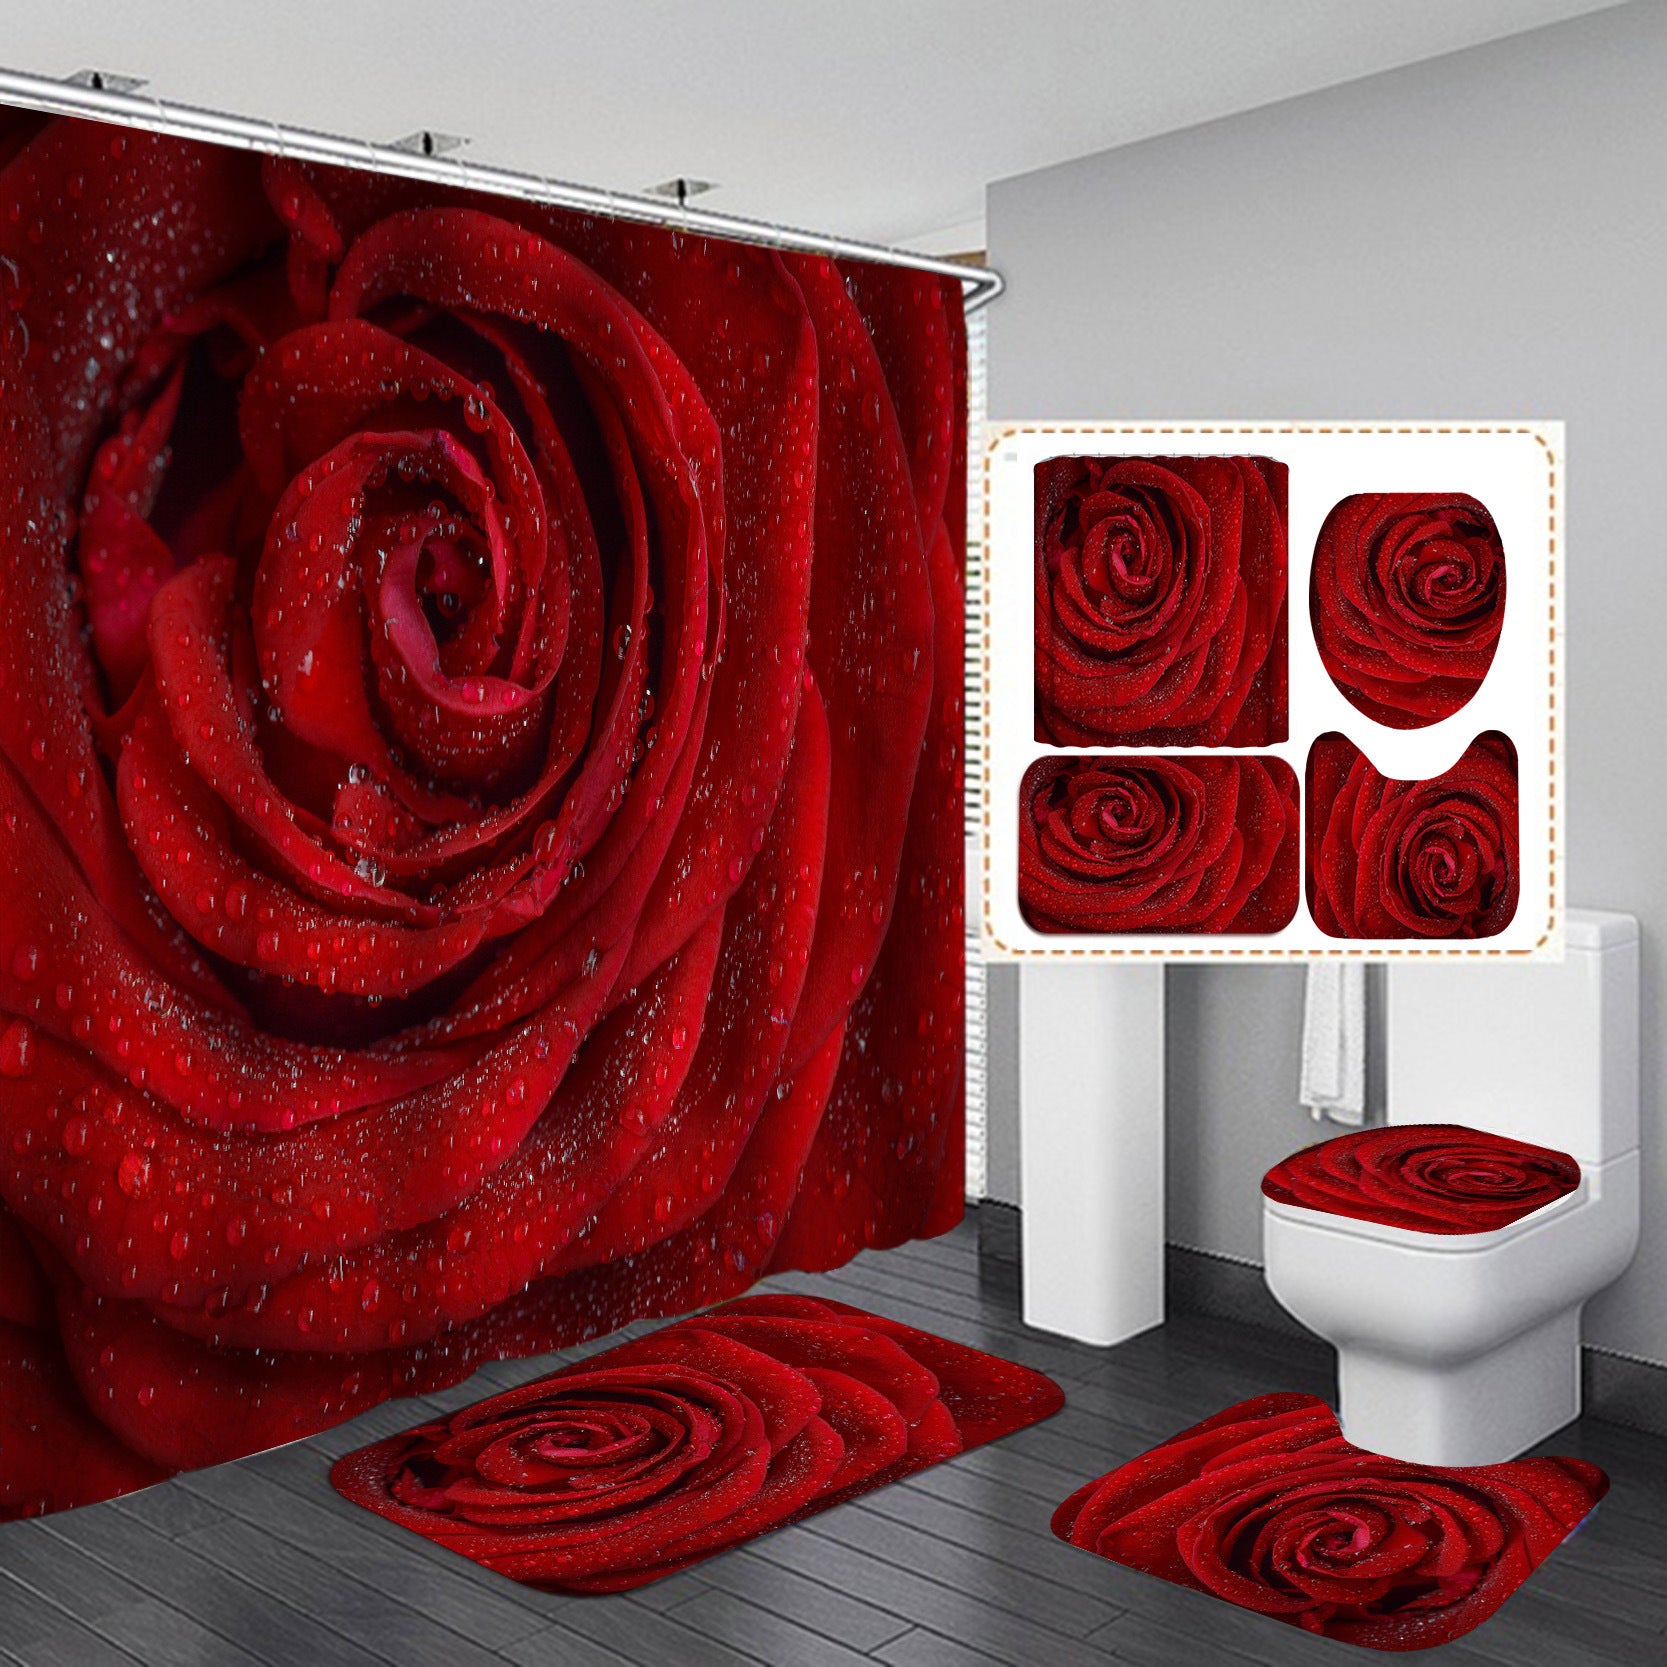 Valentine's Red Rose Bathroom Shower Curtain Sets-STYLEGOING